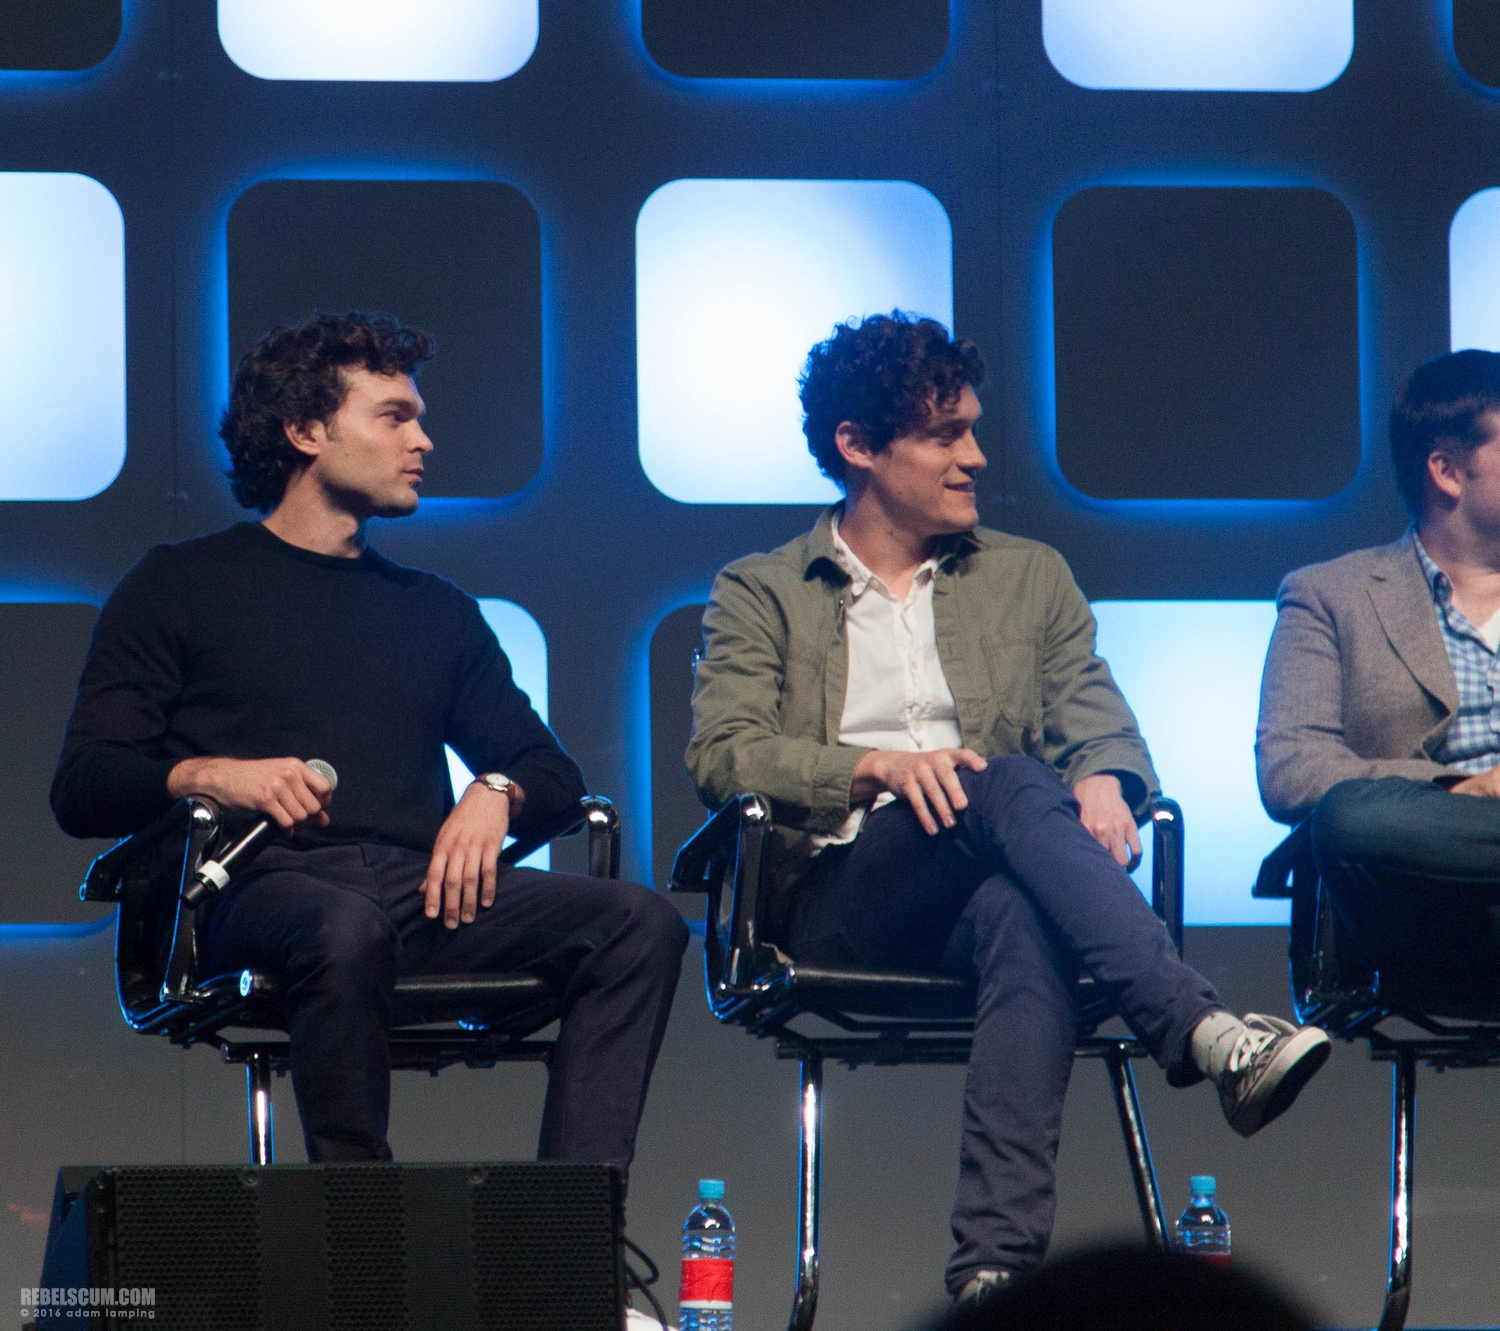 star-wars-celebration-2016-future-filmmakers-and-closing-ceremony-010.jpg